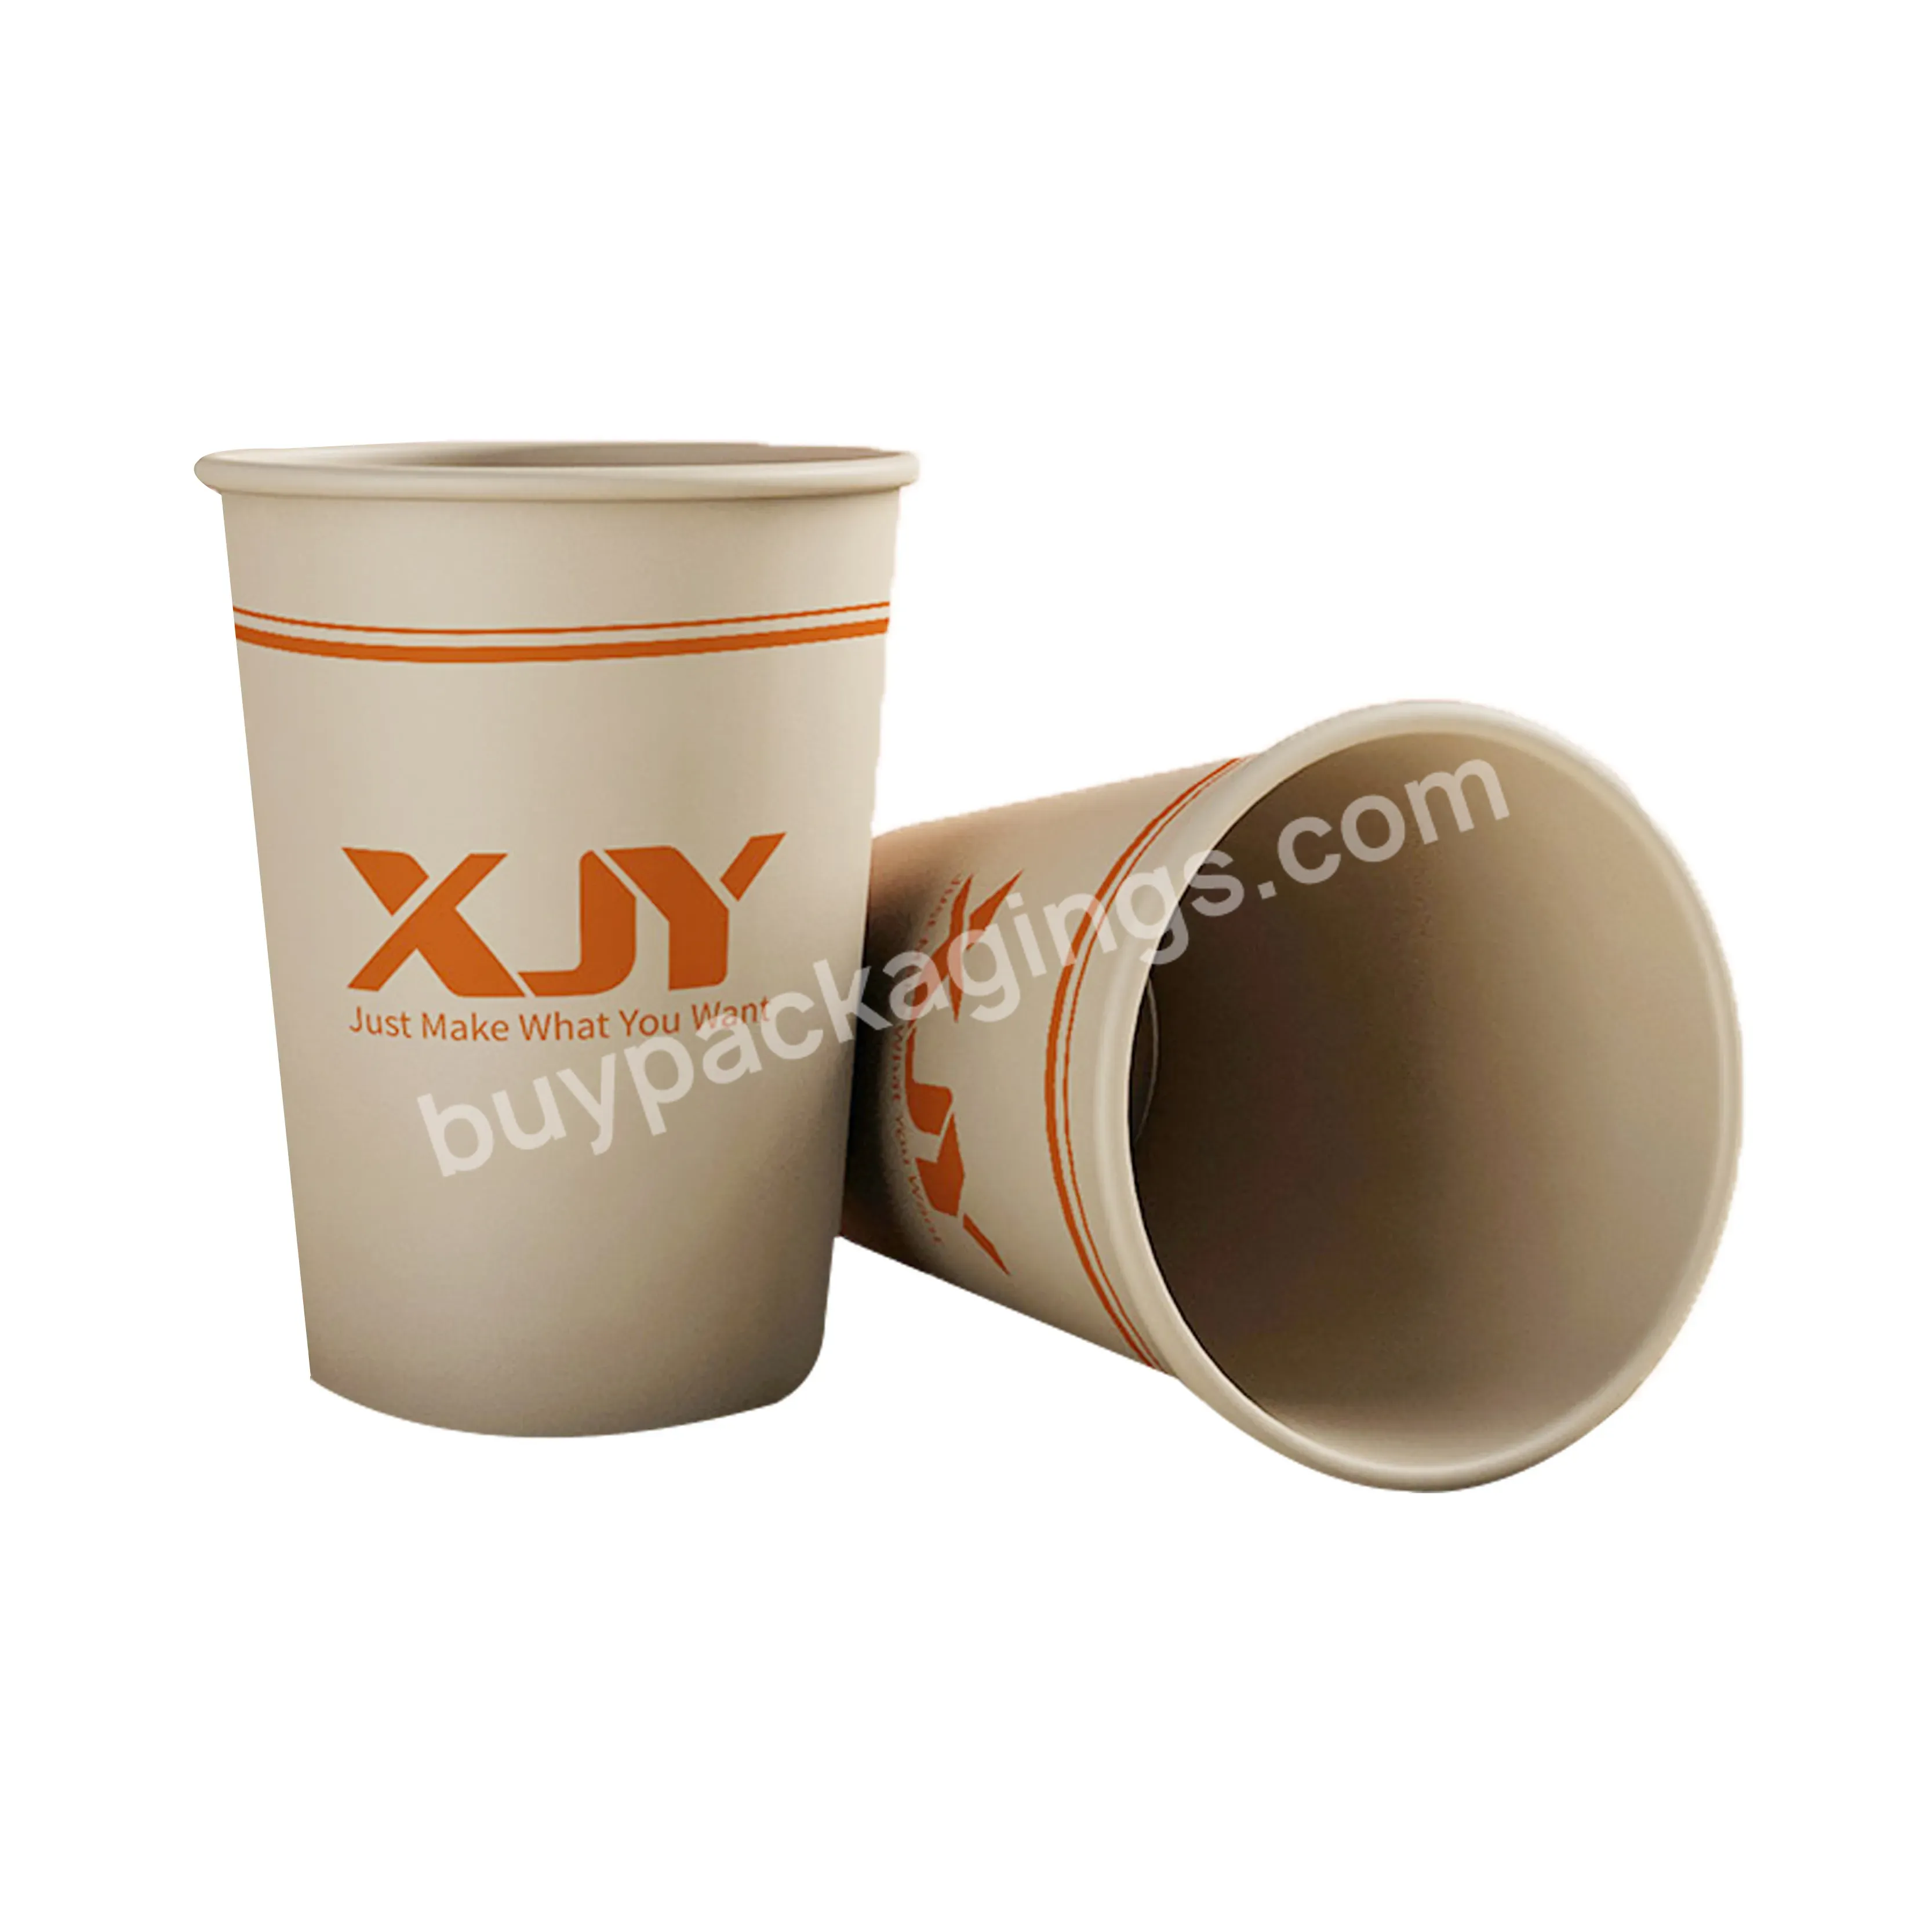 Xjy Thickened Bio-degradable Eco-friendly Heat Insulatiton Ripple Wall Hot Drinks Takeaway Packing Coffee Cups